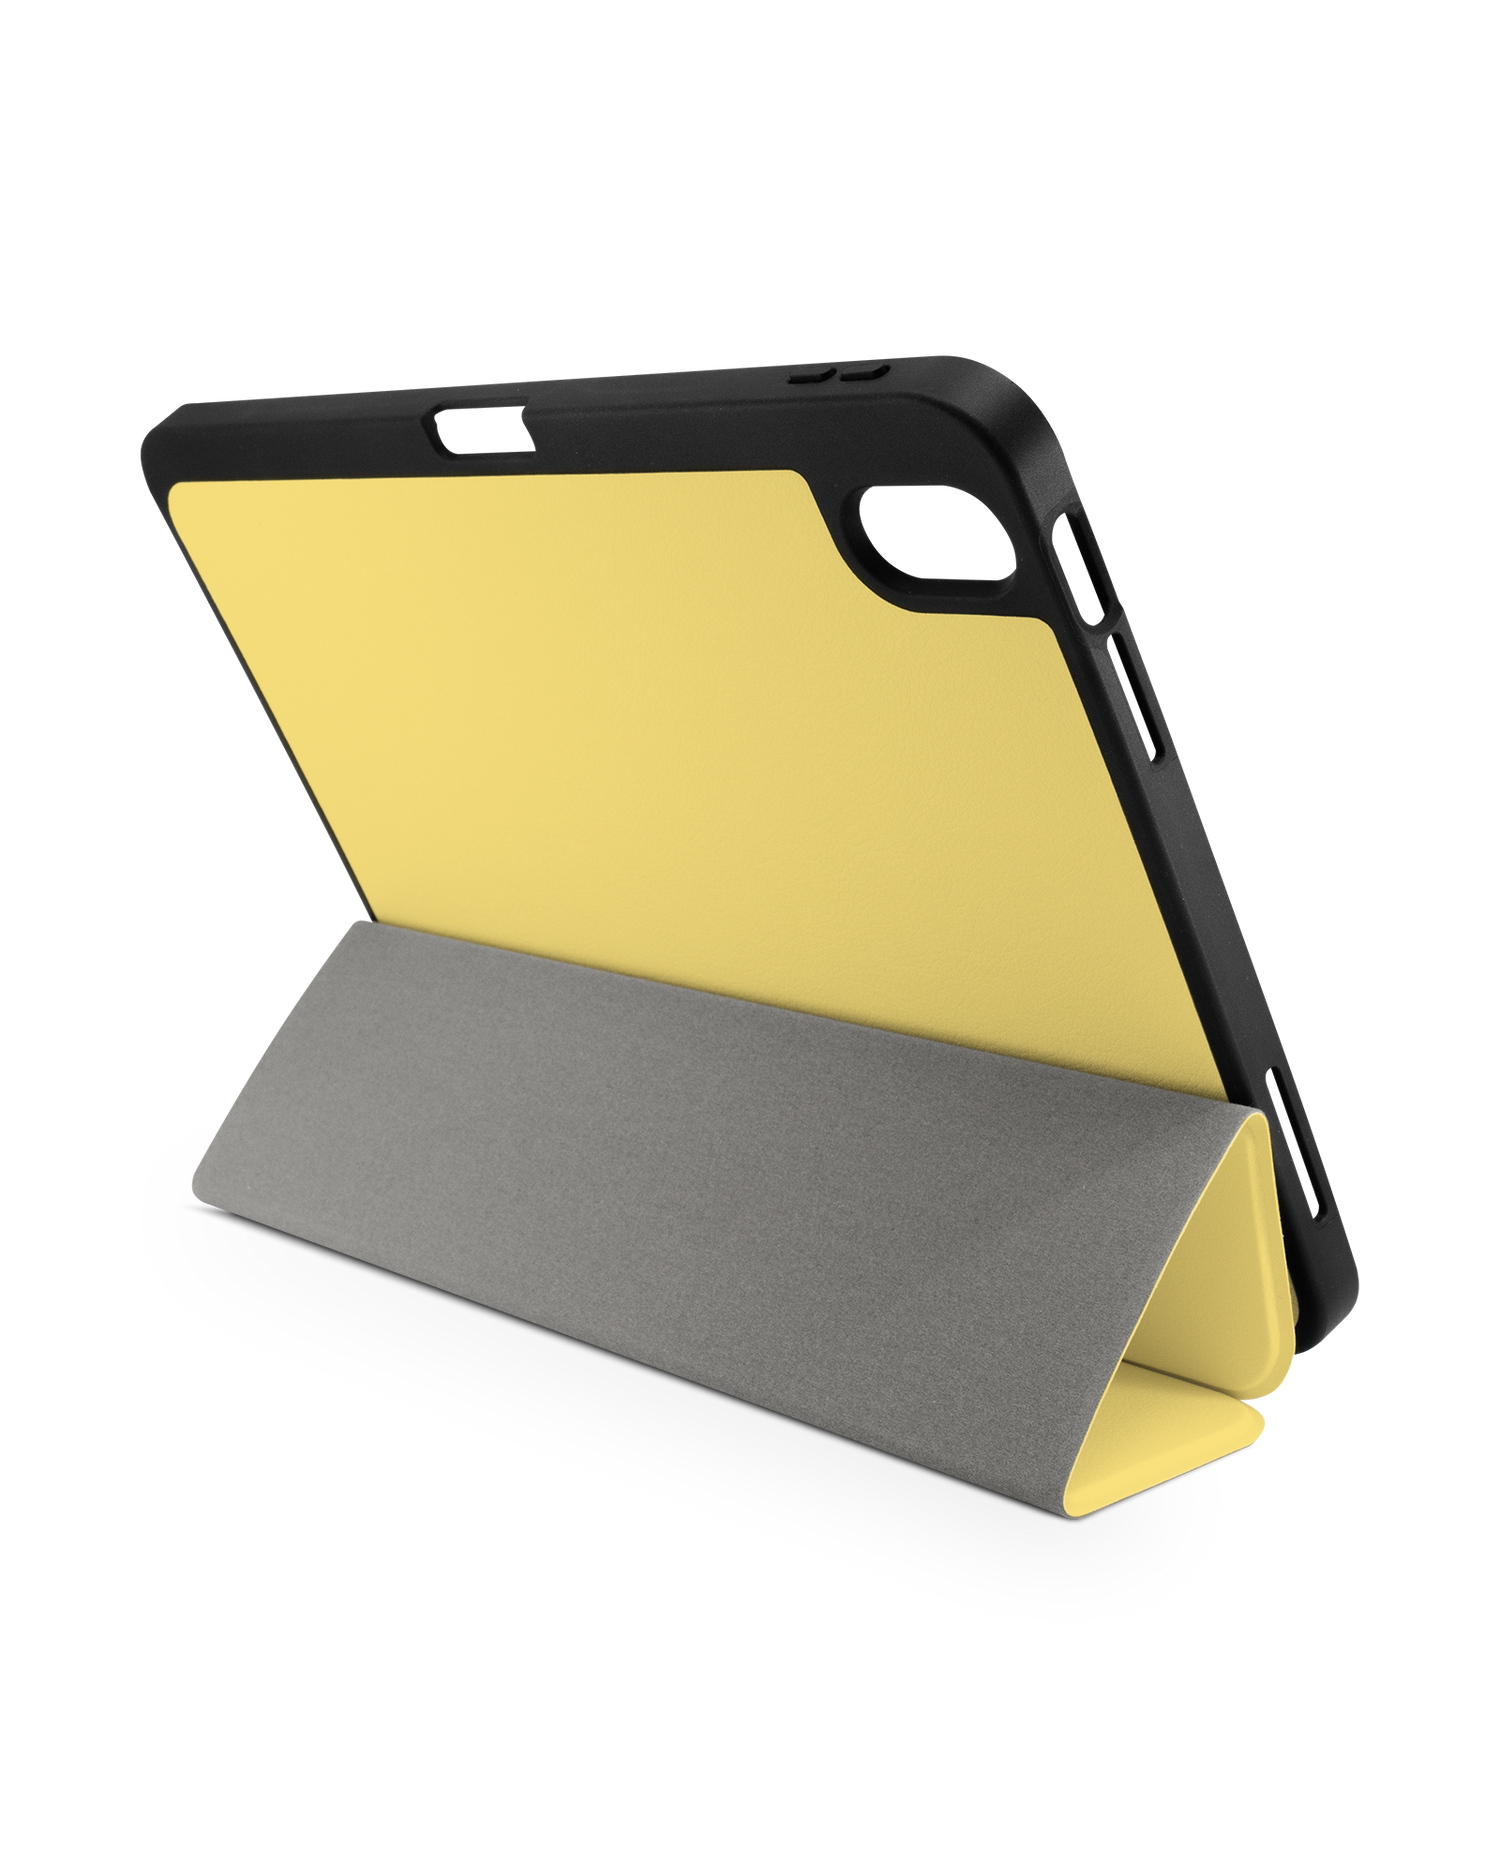 LIGHT YELLOW iPad Case with Pencil Holder for Apple iPad (10th Generation): Set up in landscape format (back view)